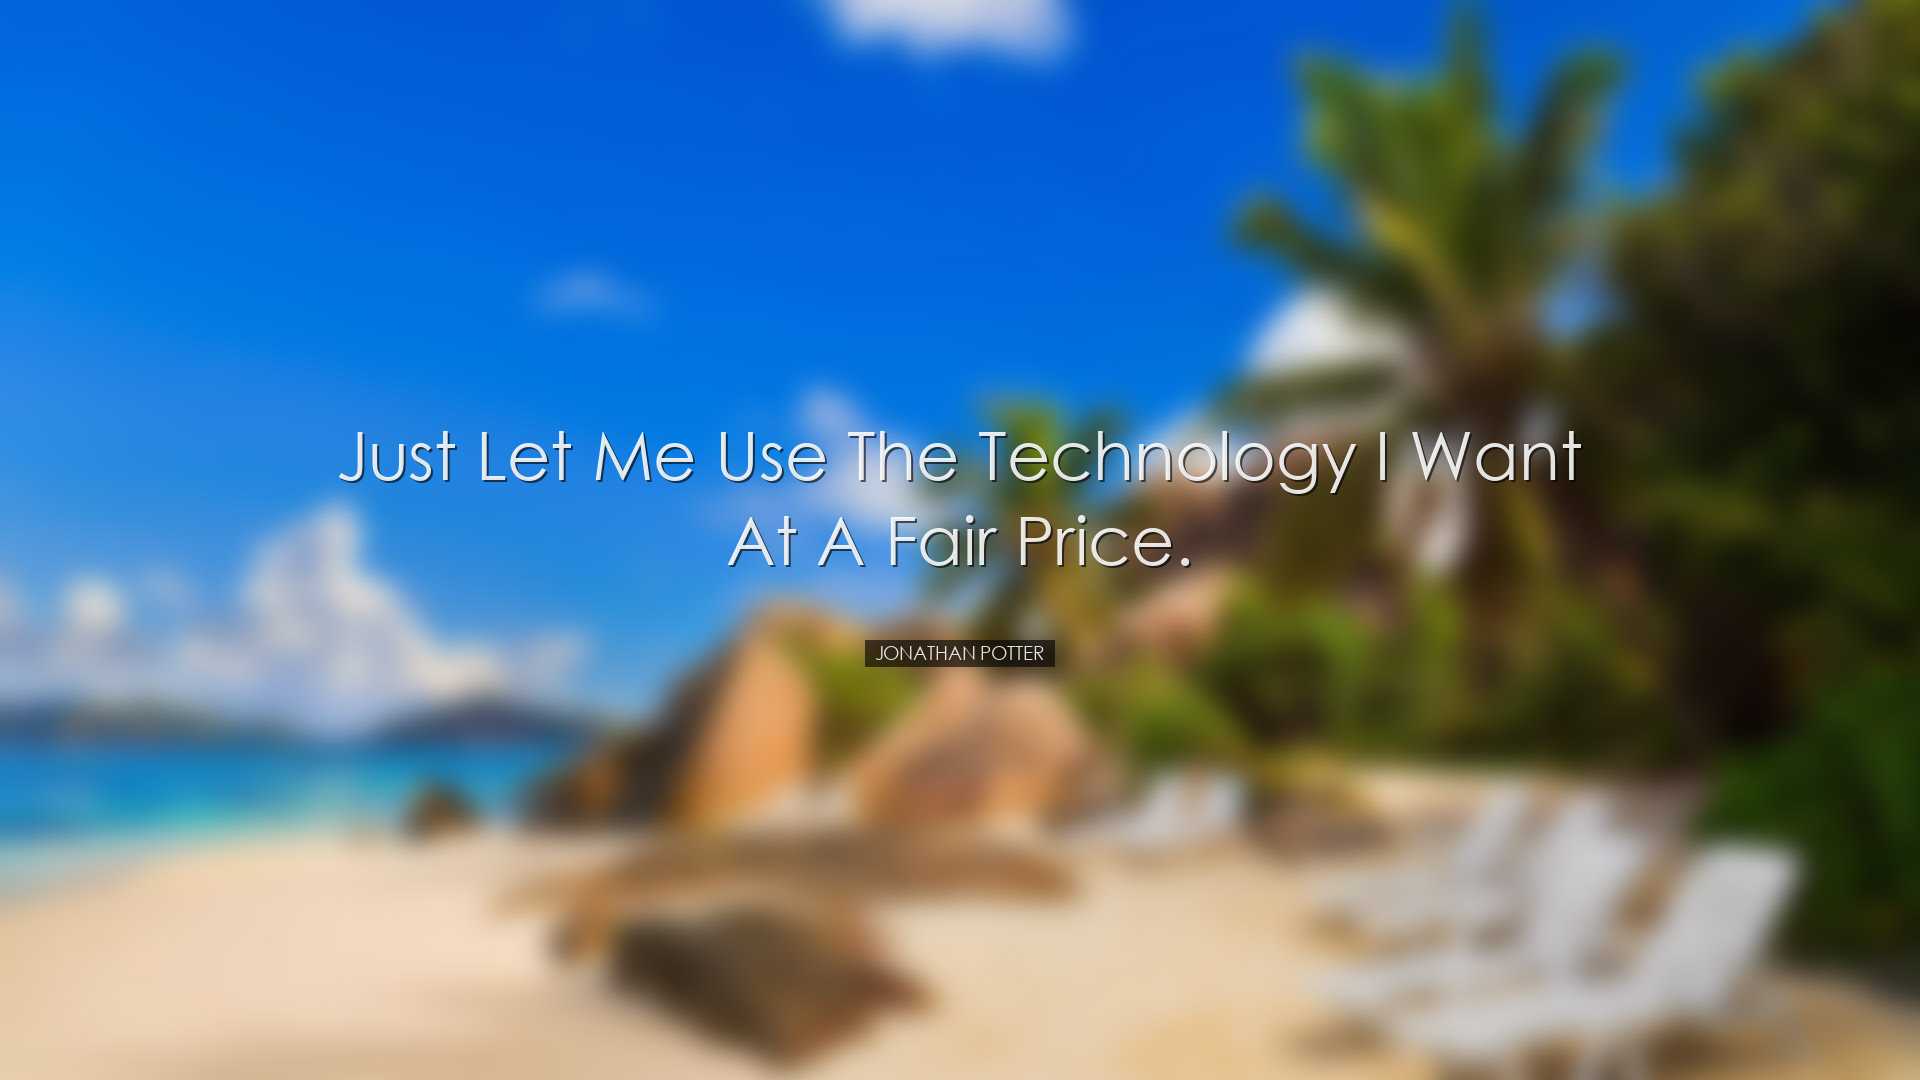 Just let me use the technology I want at a fair price. - Jonathan